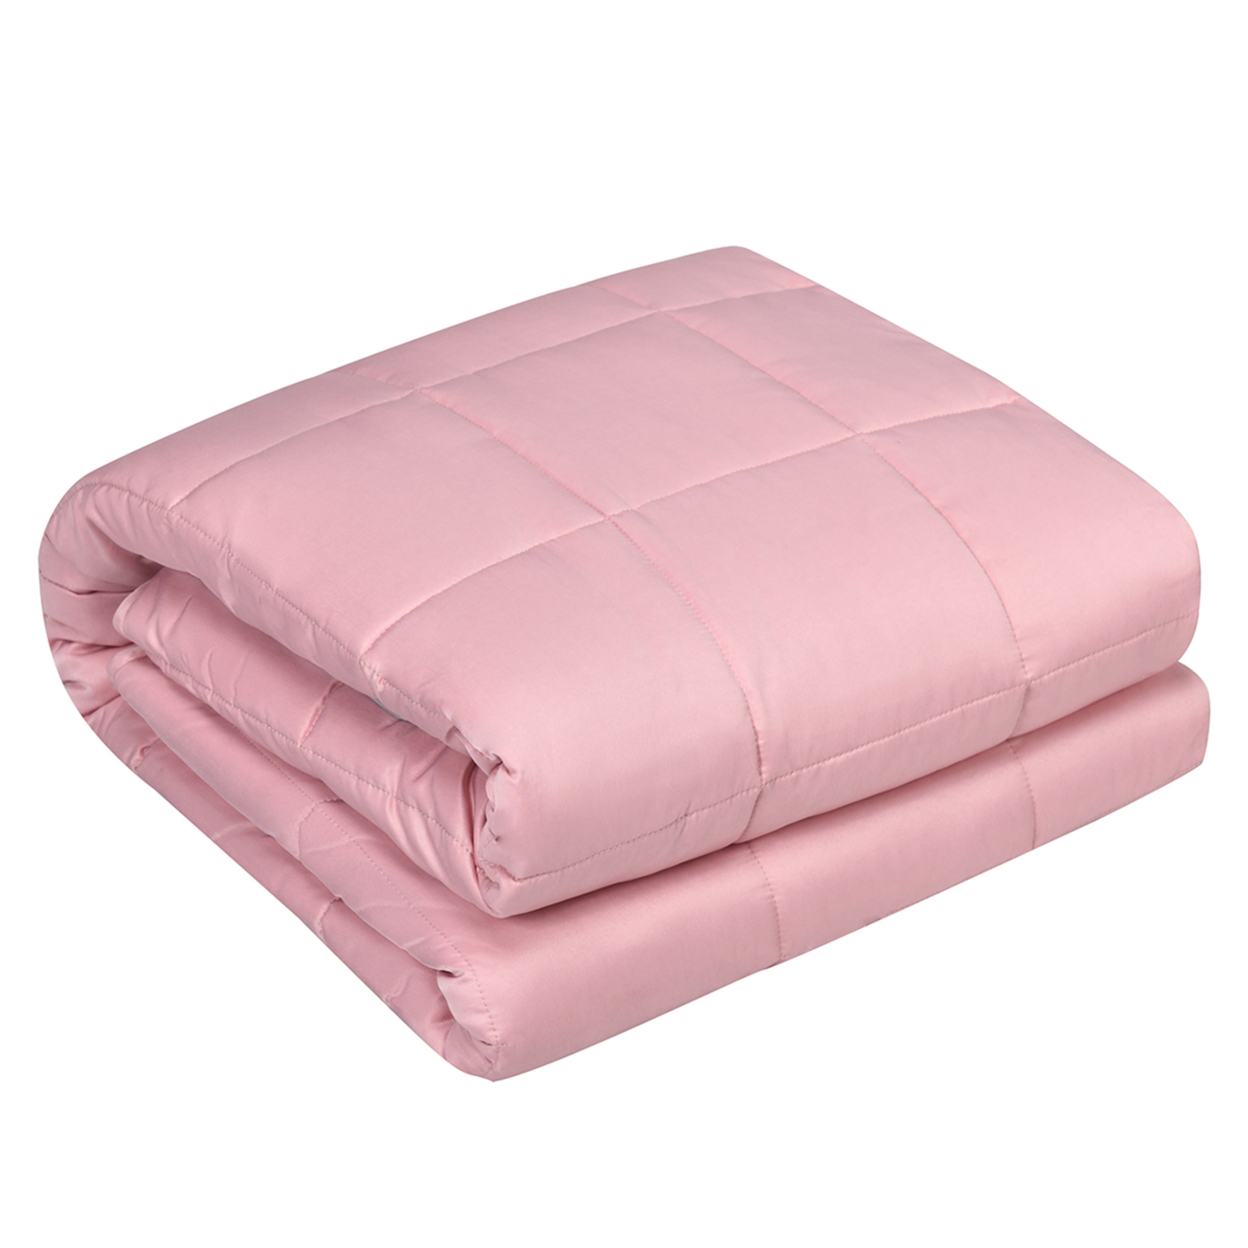 7-20 Lbs Cooling Weighted Blanket Luxury Cooler Version Pink - 60'' X 80'' 15 Lbs